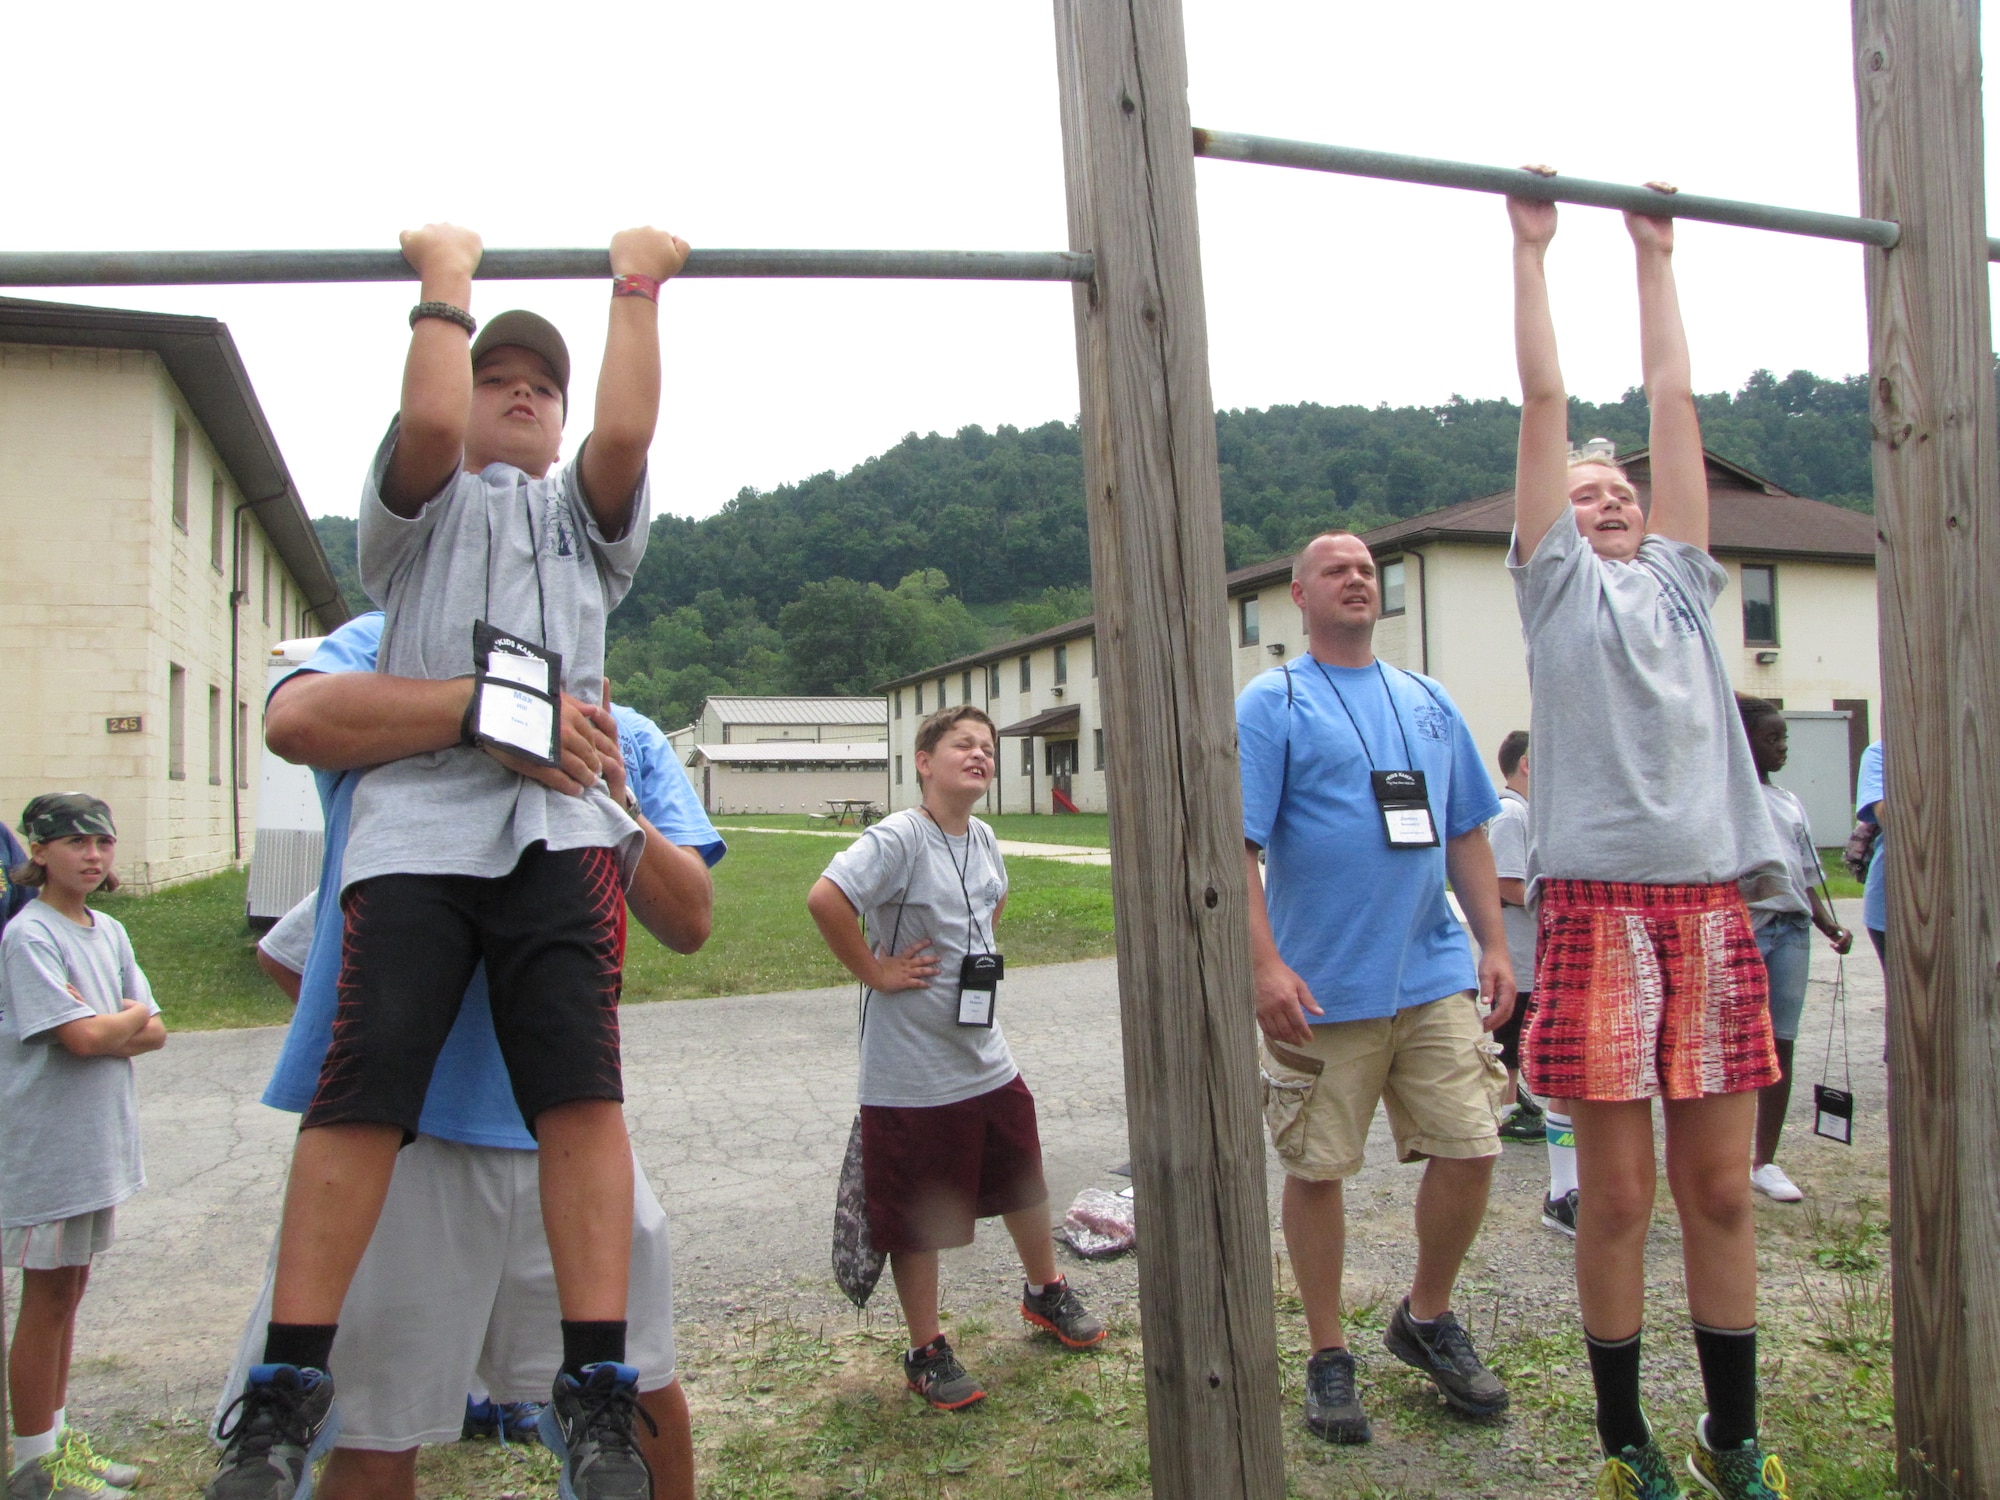 Volunteer counselors help campers perform proper military pull-ups at the 24th Annual West Virginia National Guard Military Kids Kamp. The camp is open
to children of West Virginia National Guard members between the ages of 9 and 14. (Air National Guard photo courtesy of Sherry Lewis.)